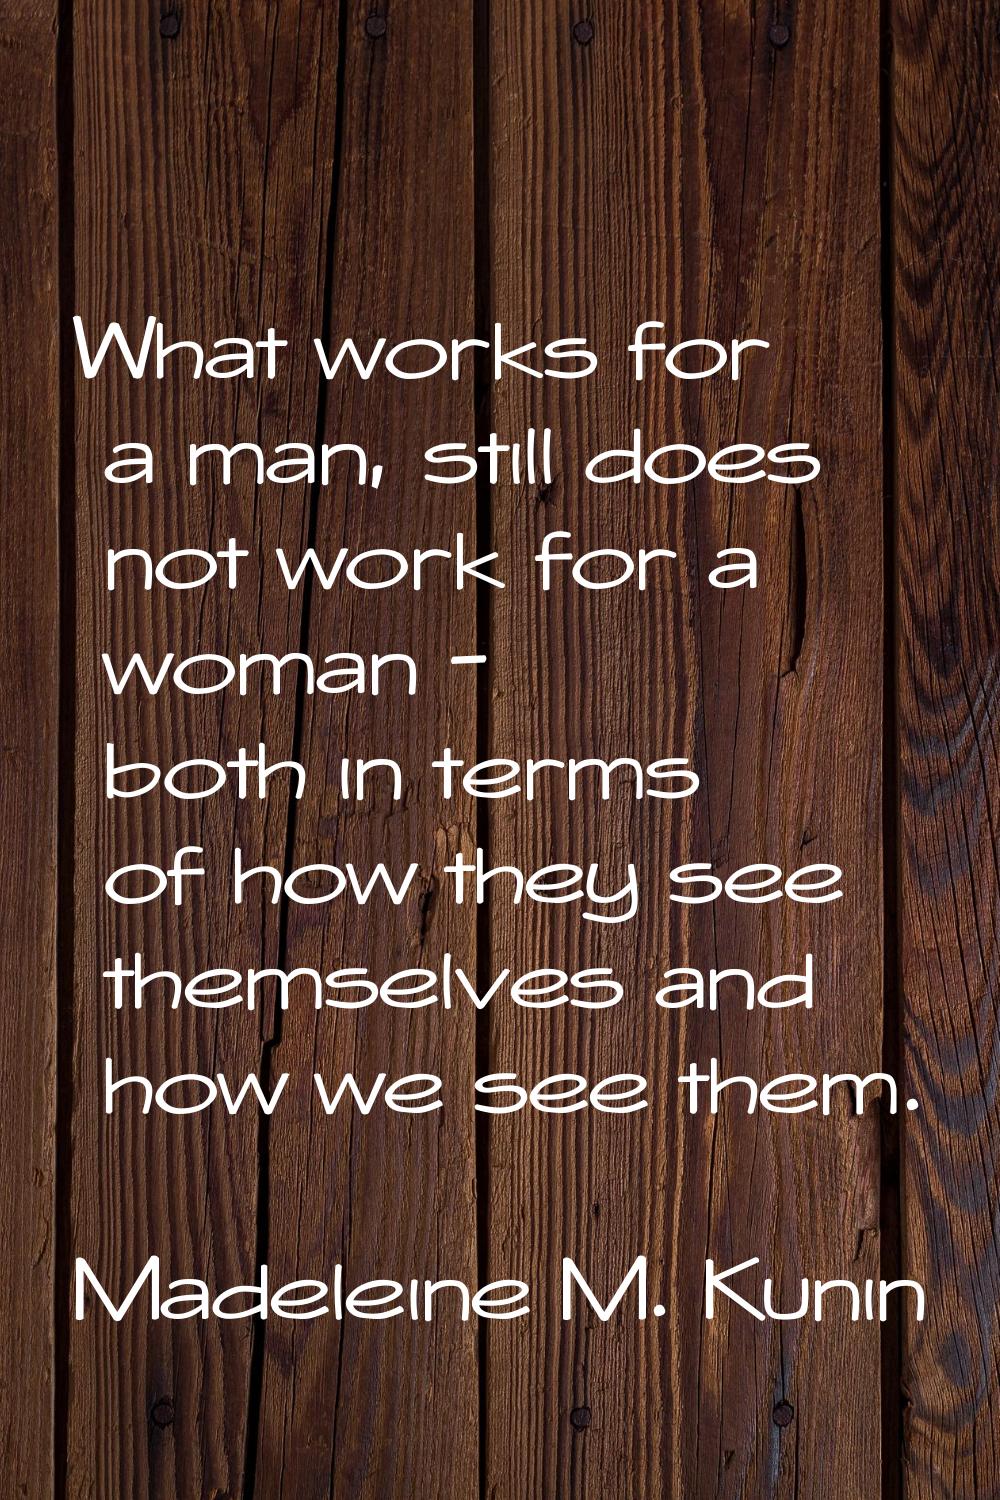 What works for a man, still does not work for a woman - both in terms of how they see themselves an